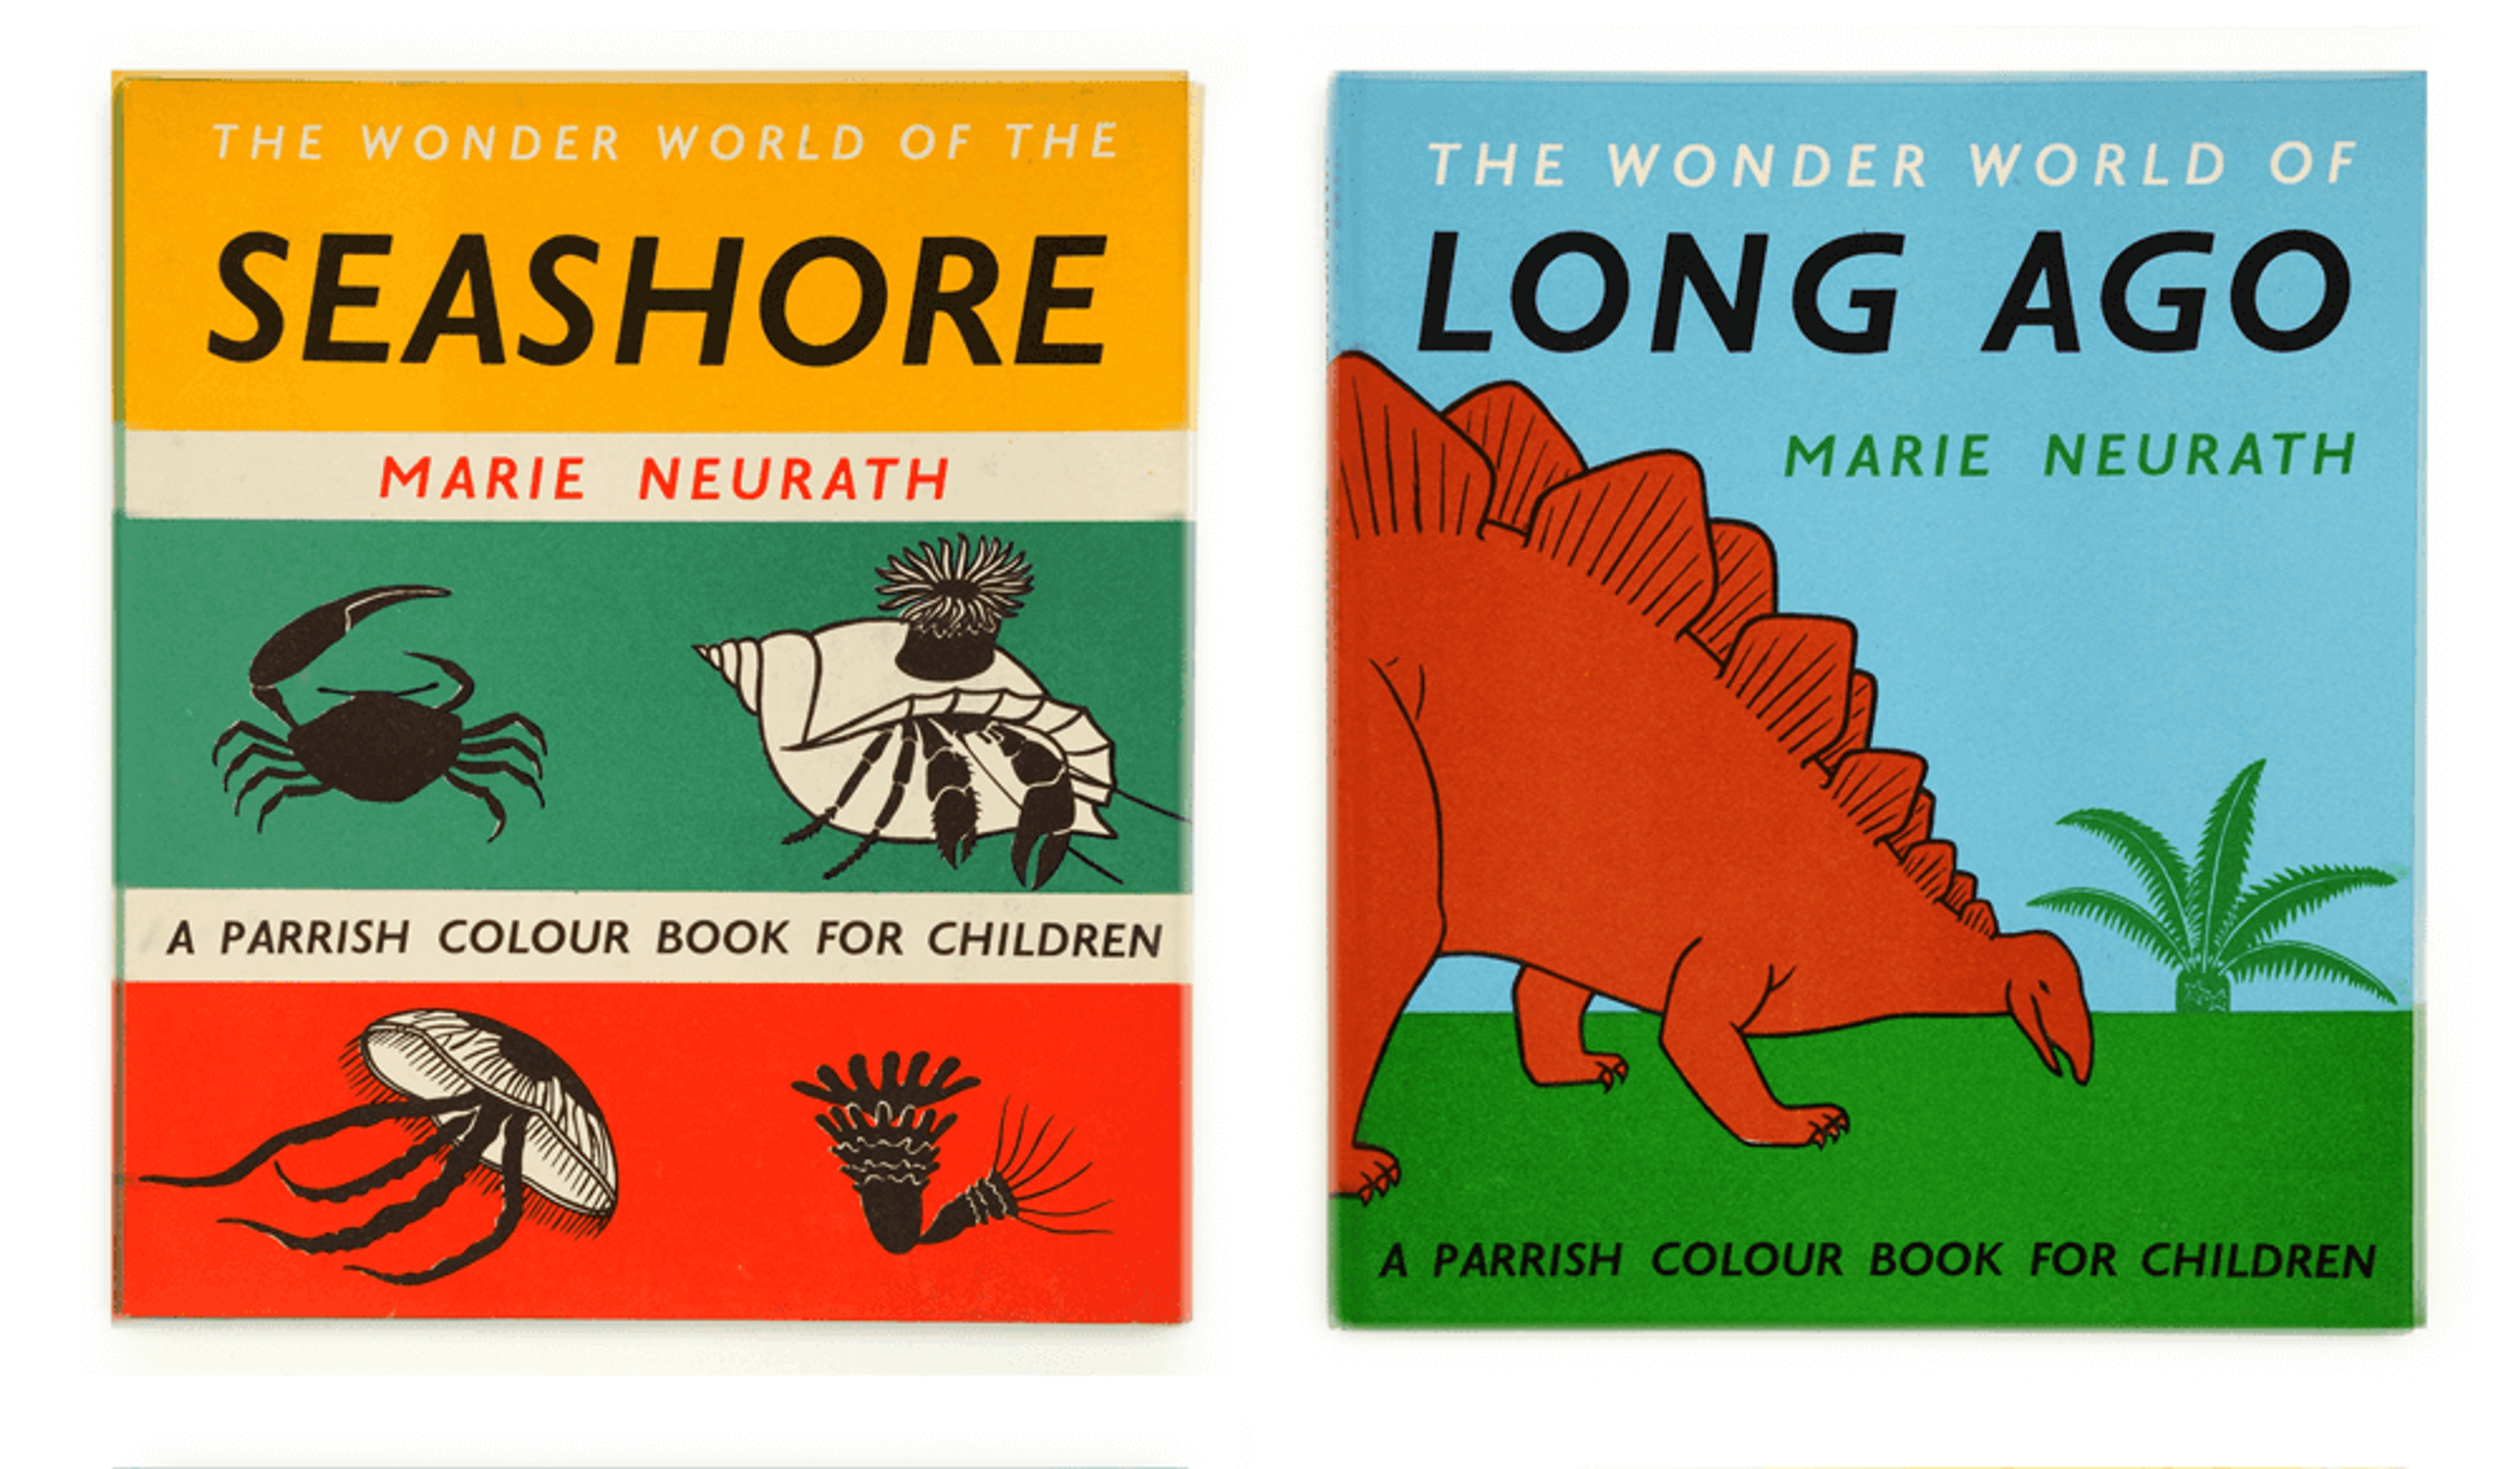 "The Wonder World of the Seashore" and "The Wonder World of Long Ago" book covers